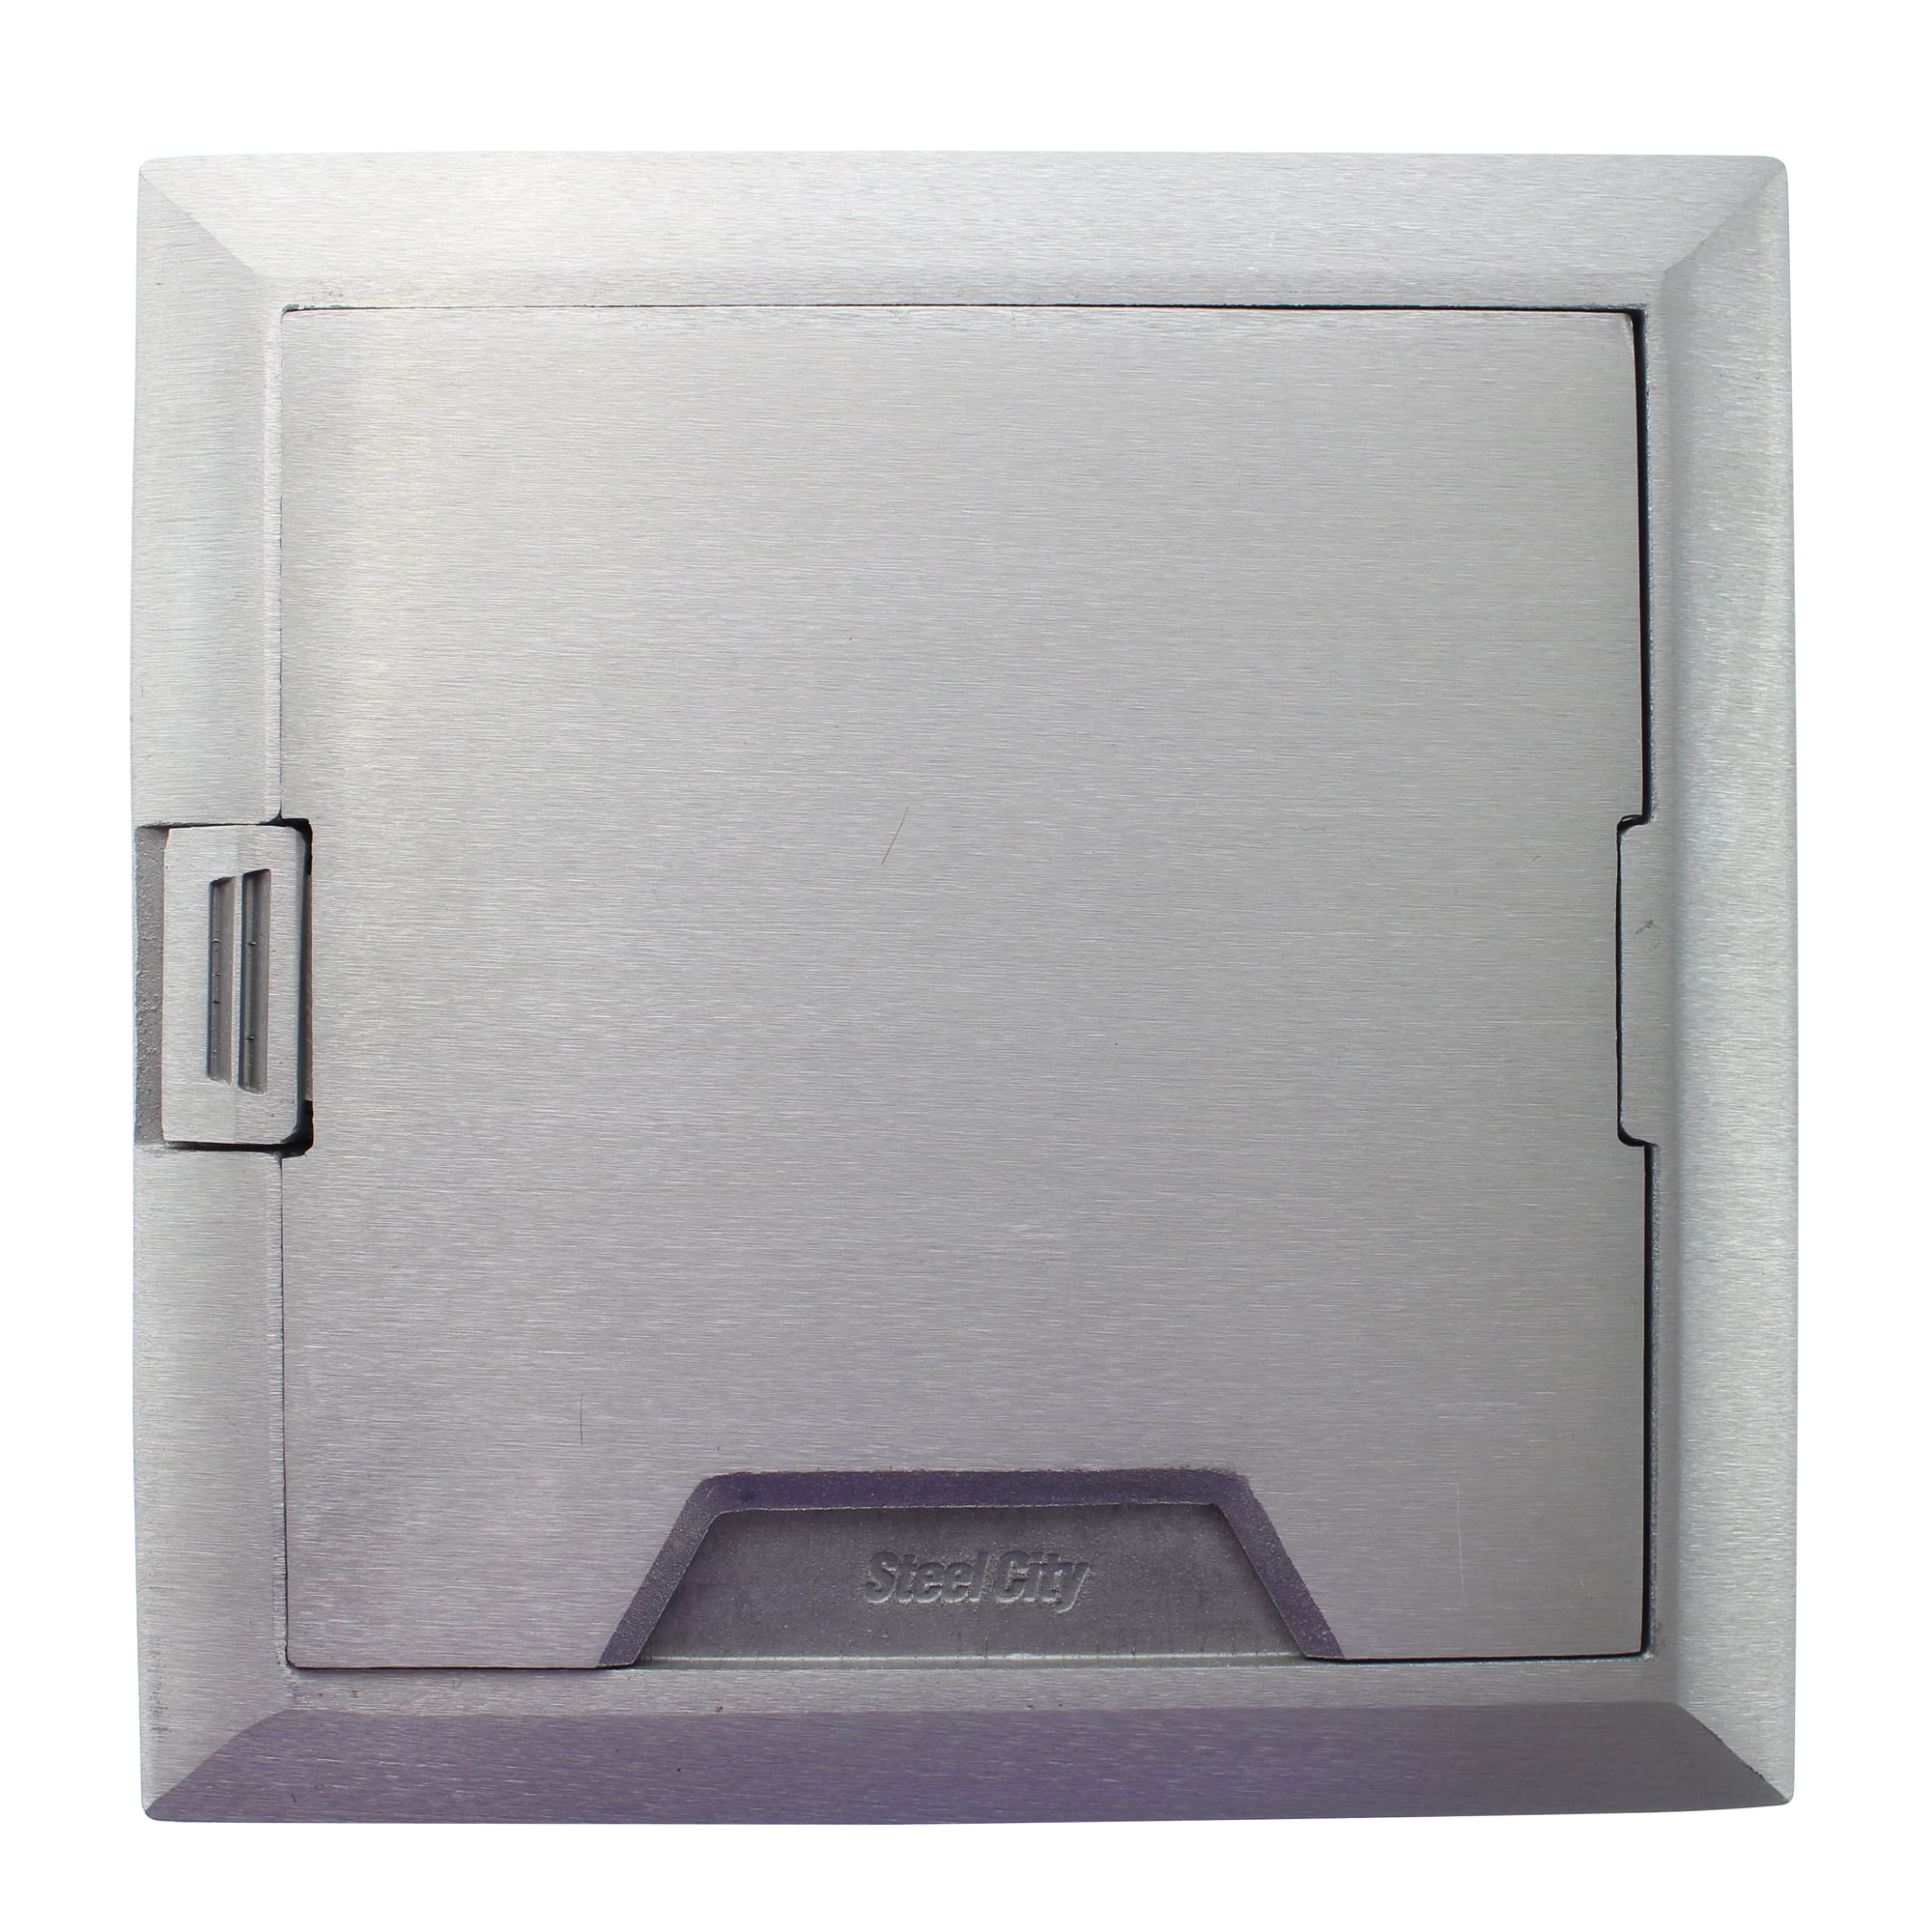 Thomas And Betts 665 Cst Sw Alm Floor Box Cover For 665 And